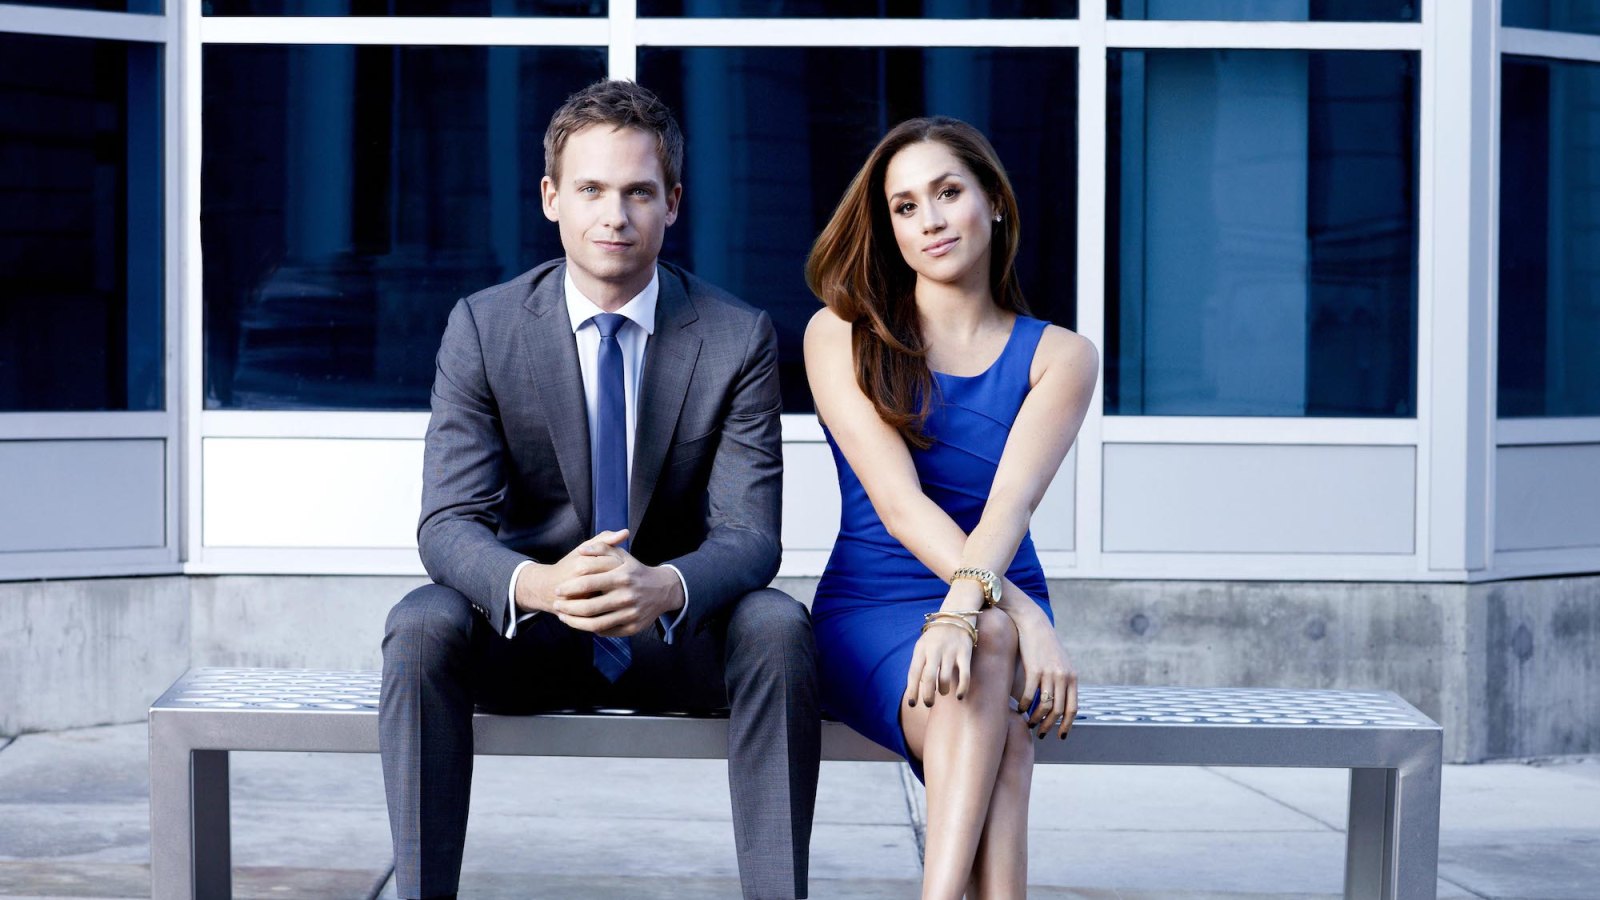 Suits Writers Slam Netflix for Pretty Sad Residual Checks as Show Surges in Popularity